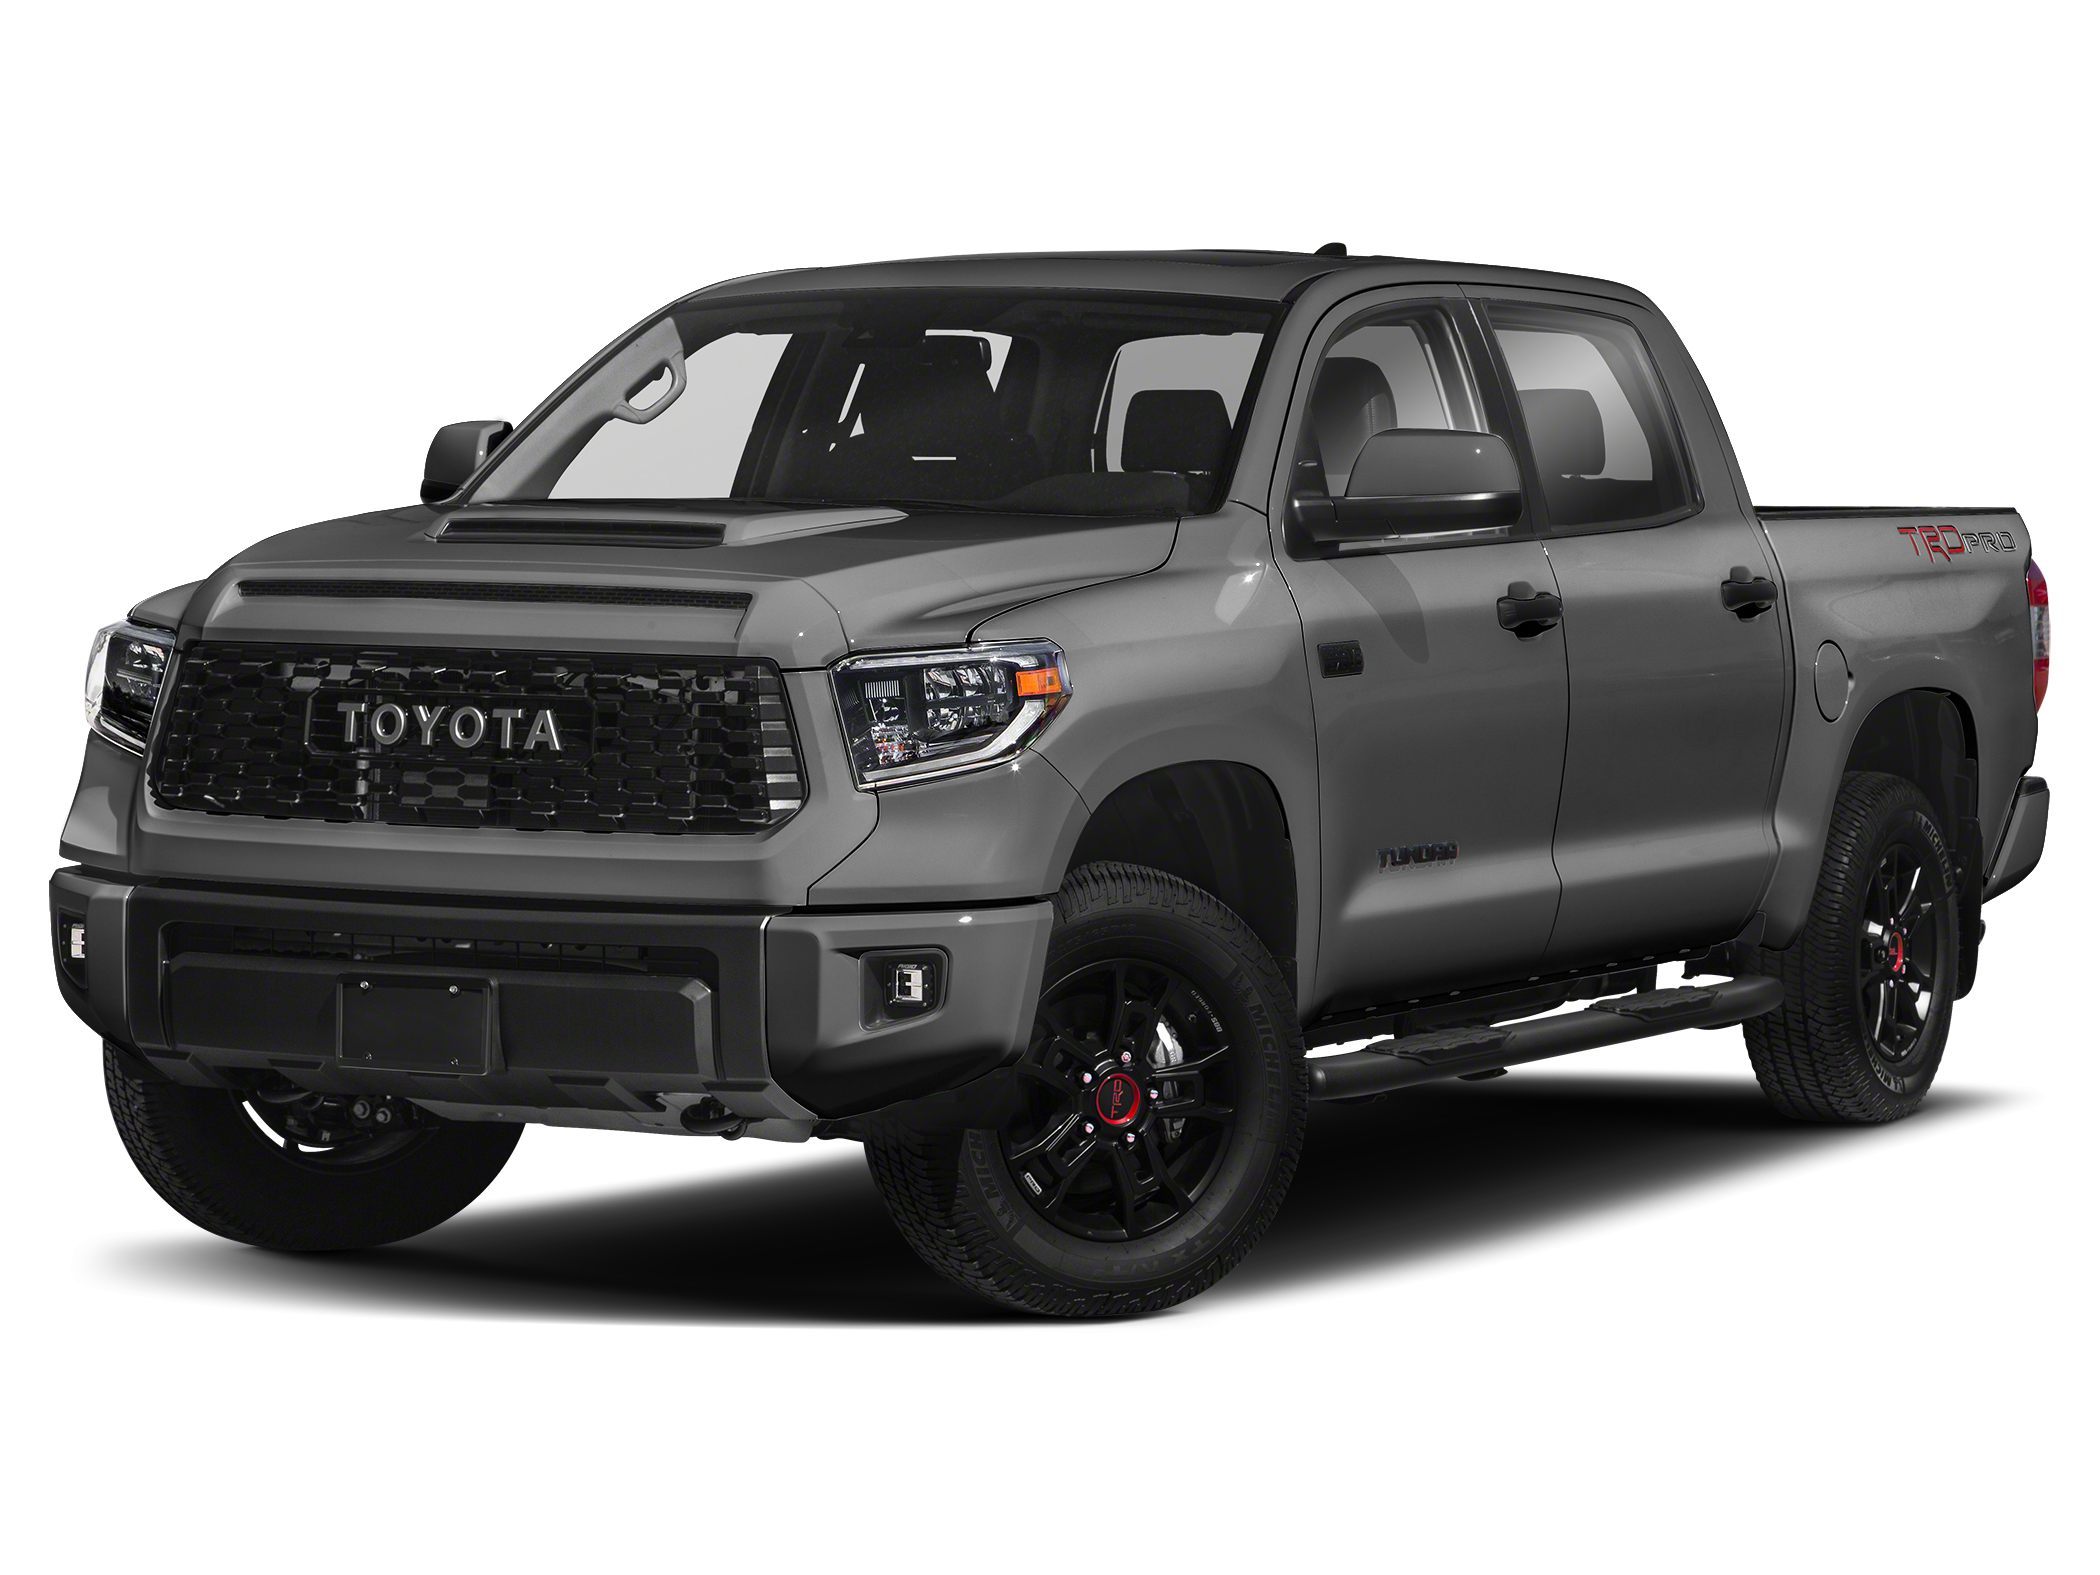 New Toyota Tundra in Oakland, CA | Inventory, Photos, Videos, Features